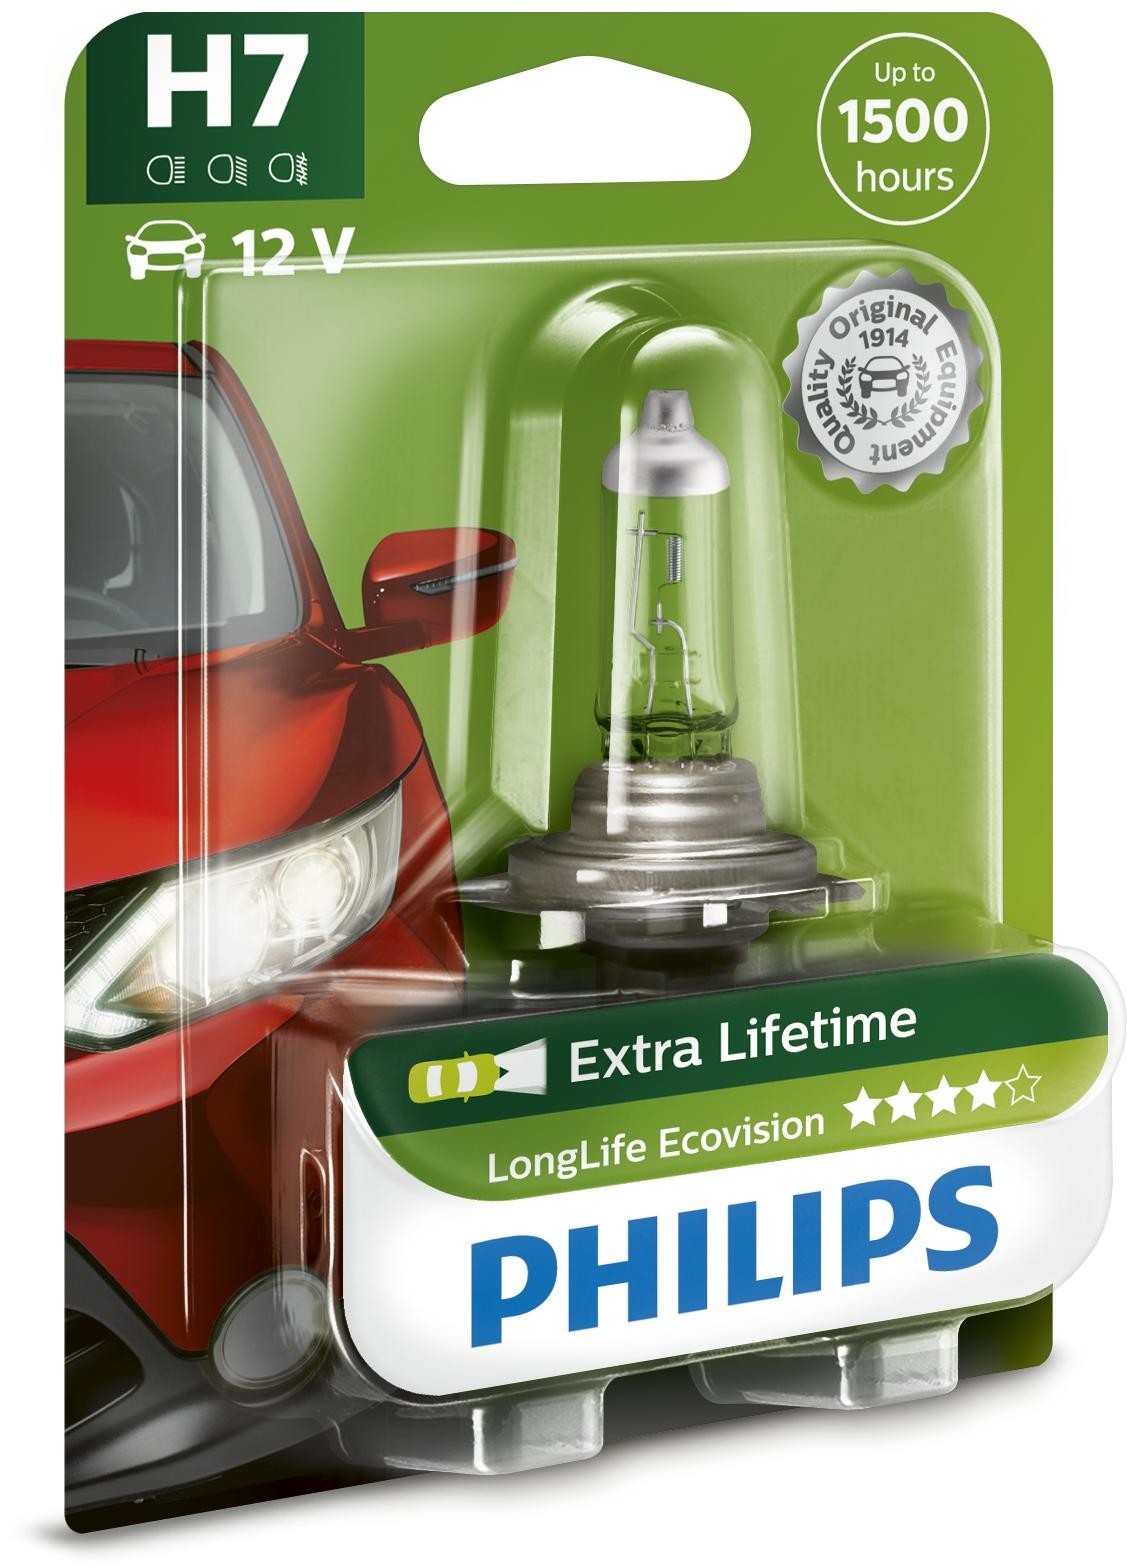 Ampoule H7 LongLife EcoVision 55 W [12 V] (1 pc.), 12 V PHILIPS